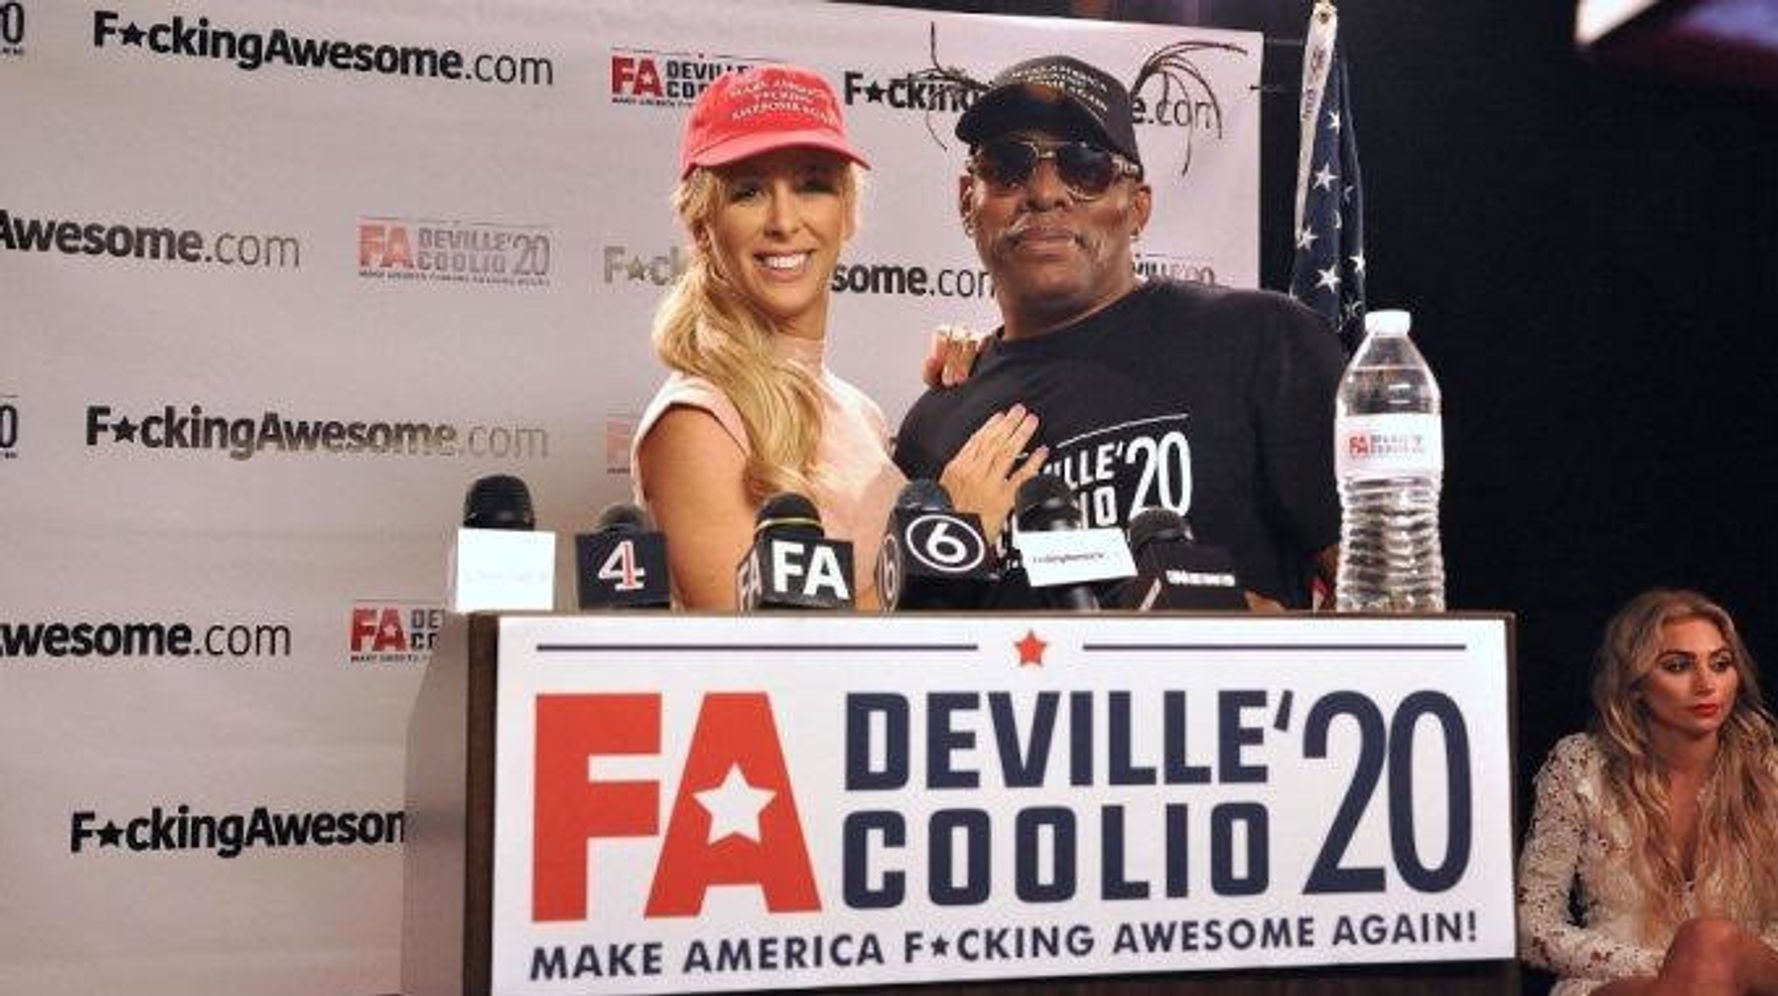 Porn Star Considers Presidential Run With Coolio As VP | HuffPost UK News